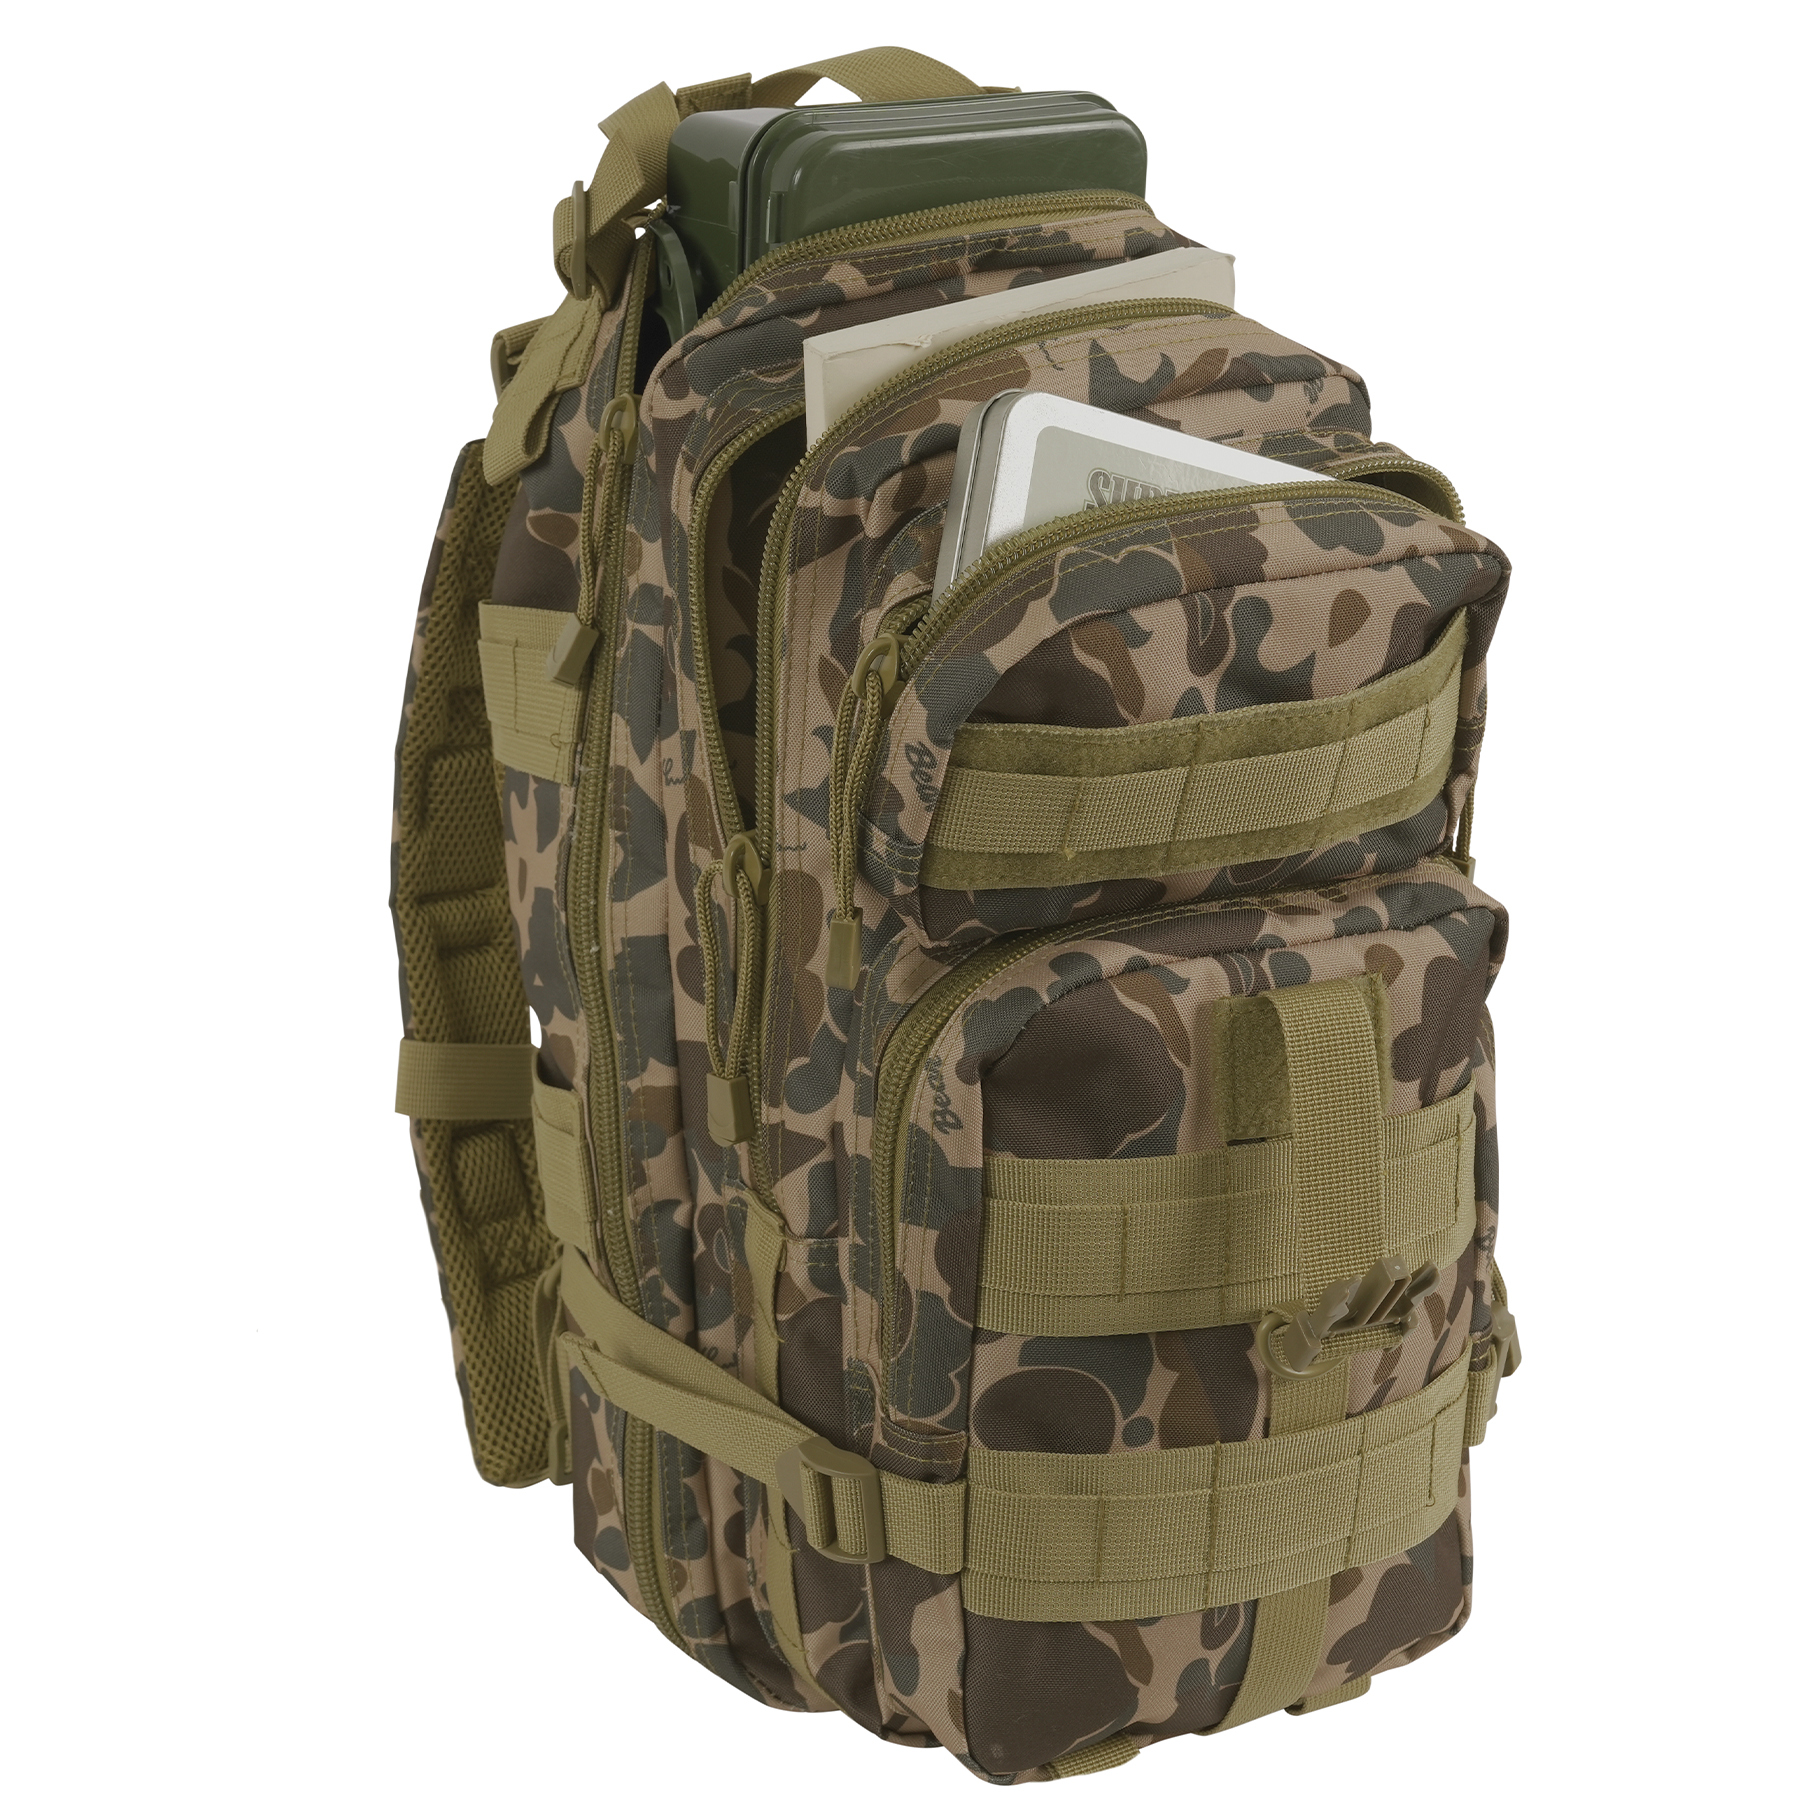 Fred Bear Camo Tactical Pack